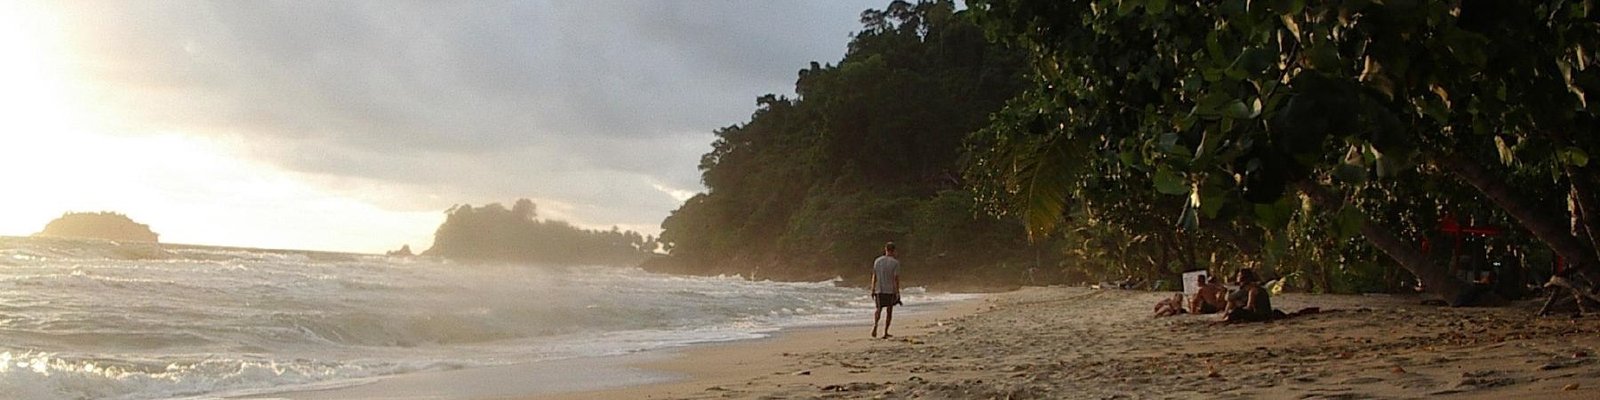 Koh Chang Travel Guide Thailand